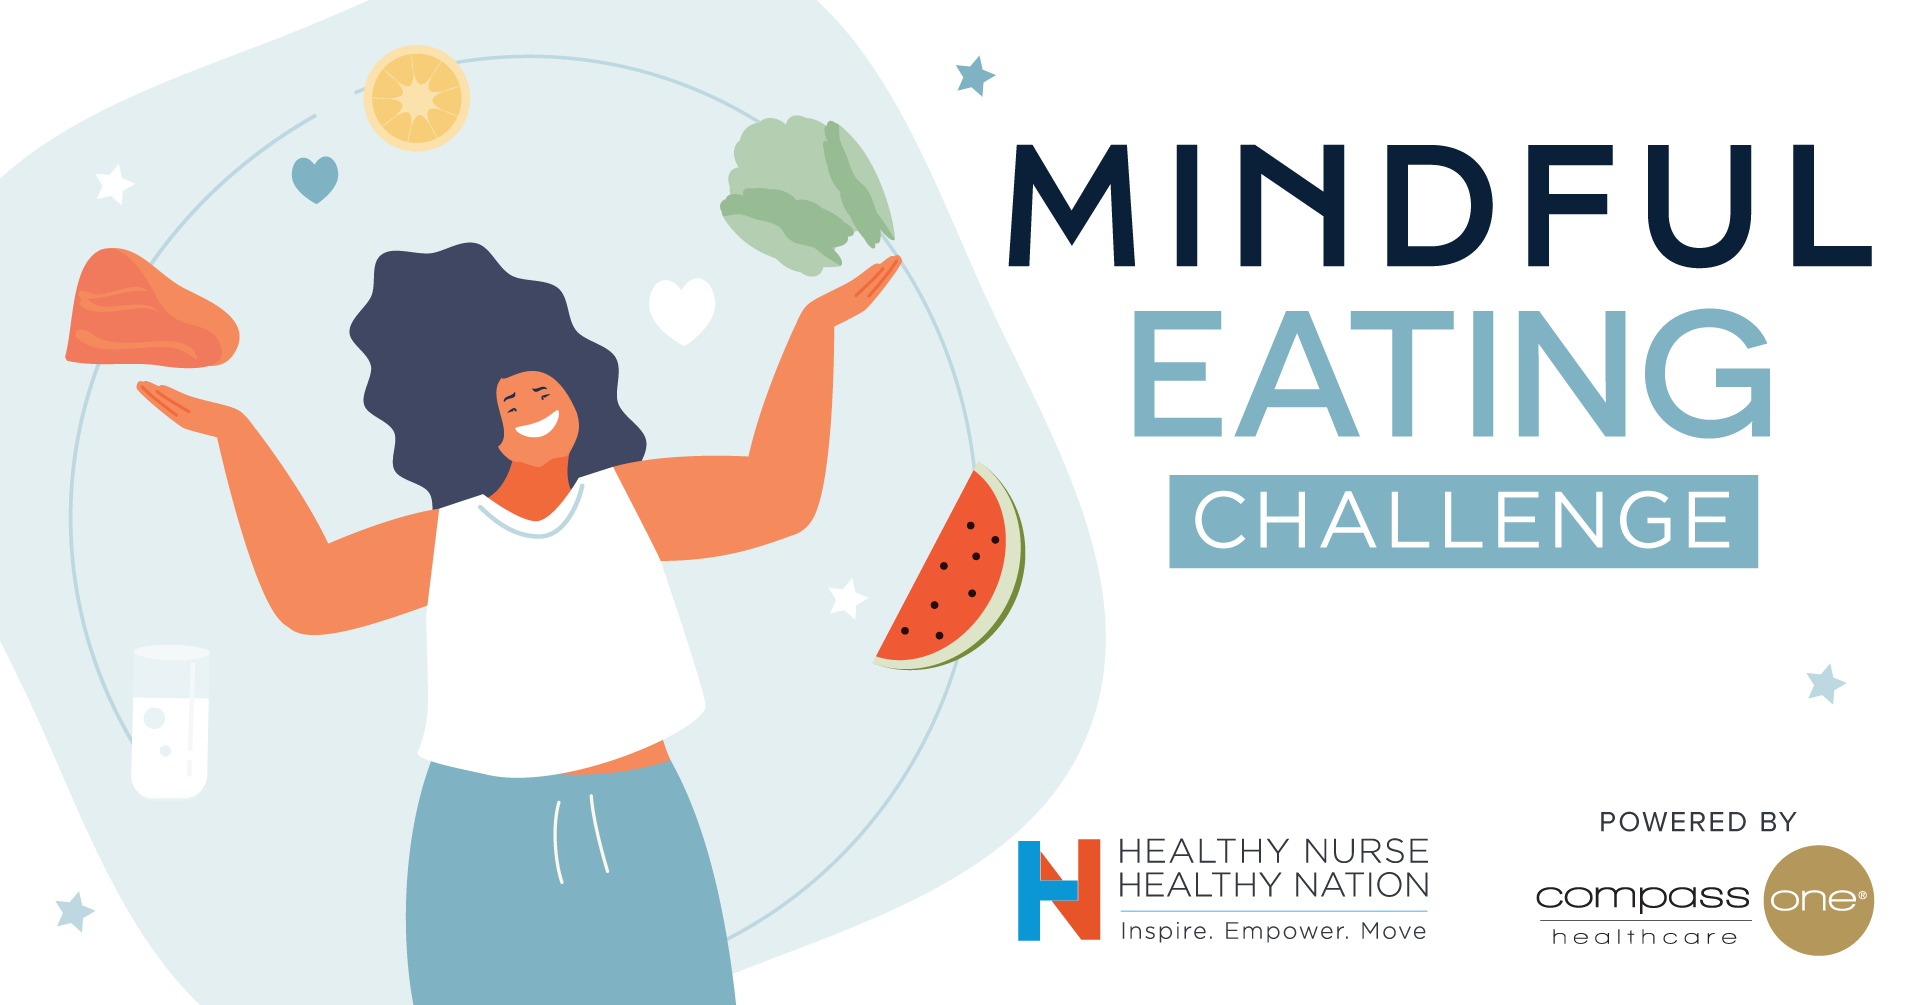 Make the Most of Meal Moments - Mindful Eating, powered by Morrison Healthcare, a Division of Compass One Healthcare - Day 3 Tip 4682